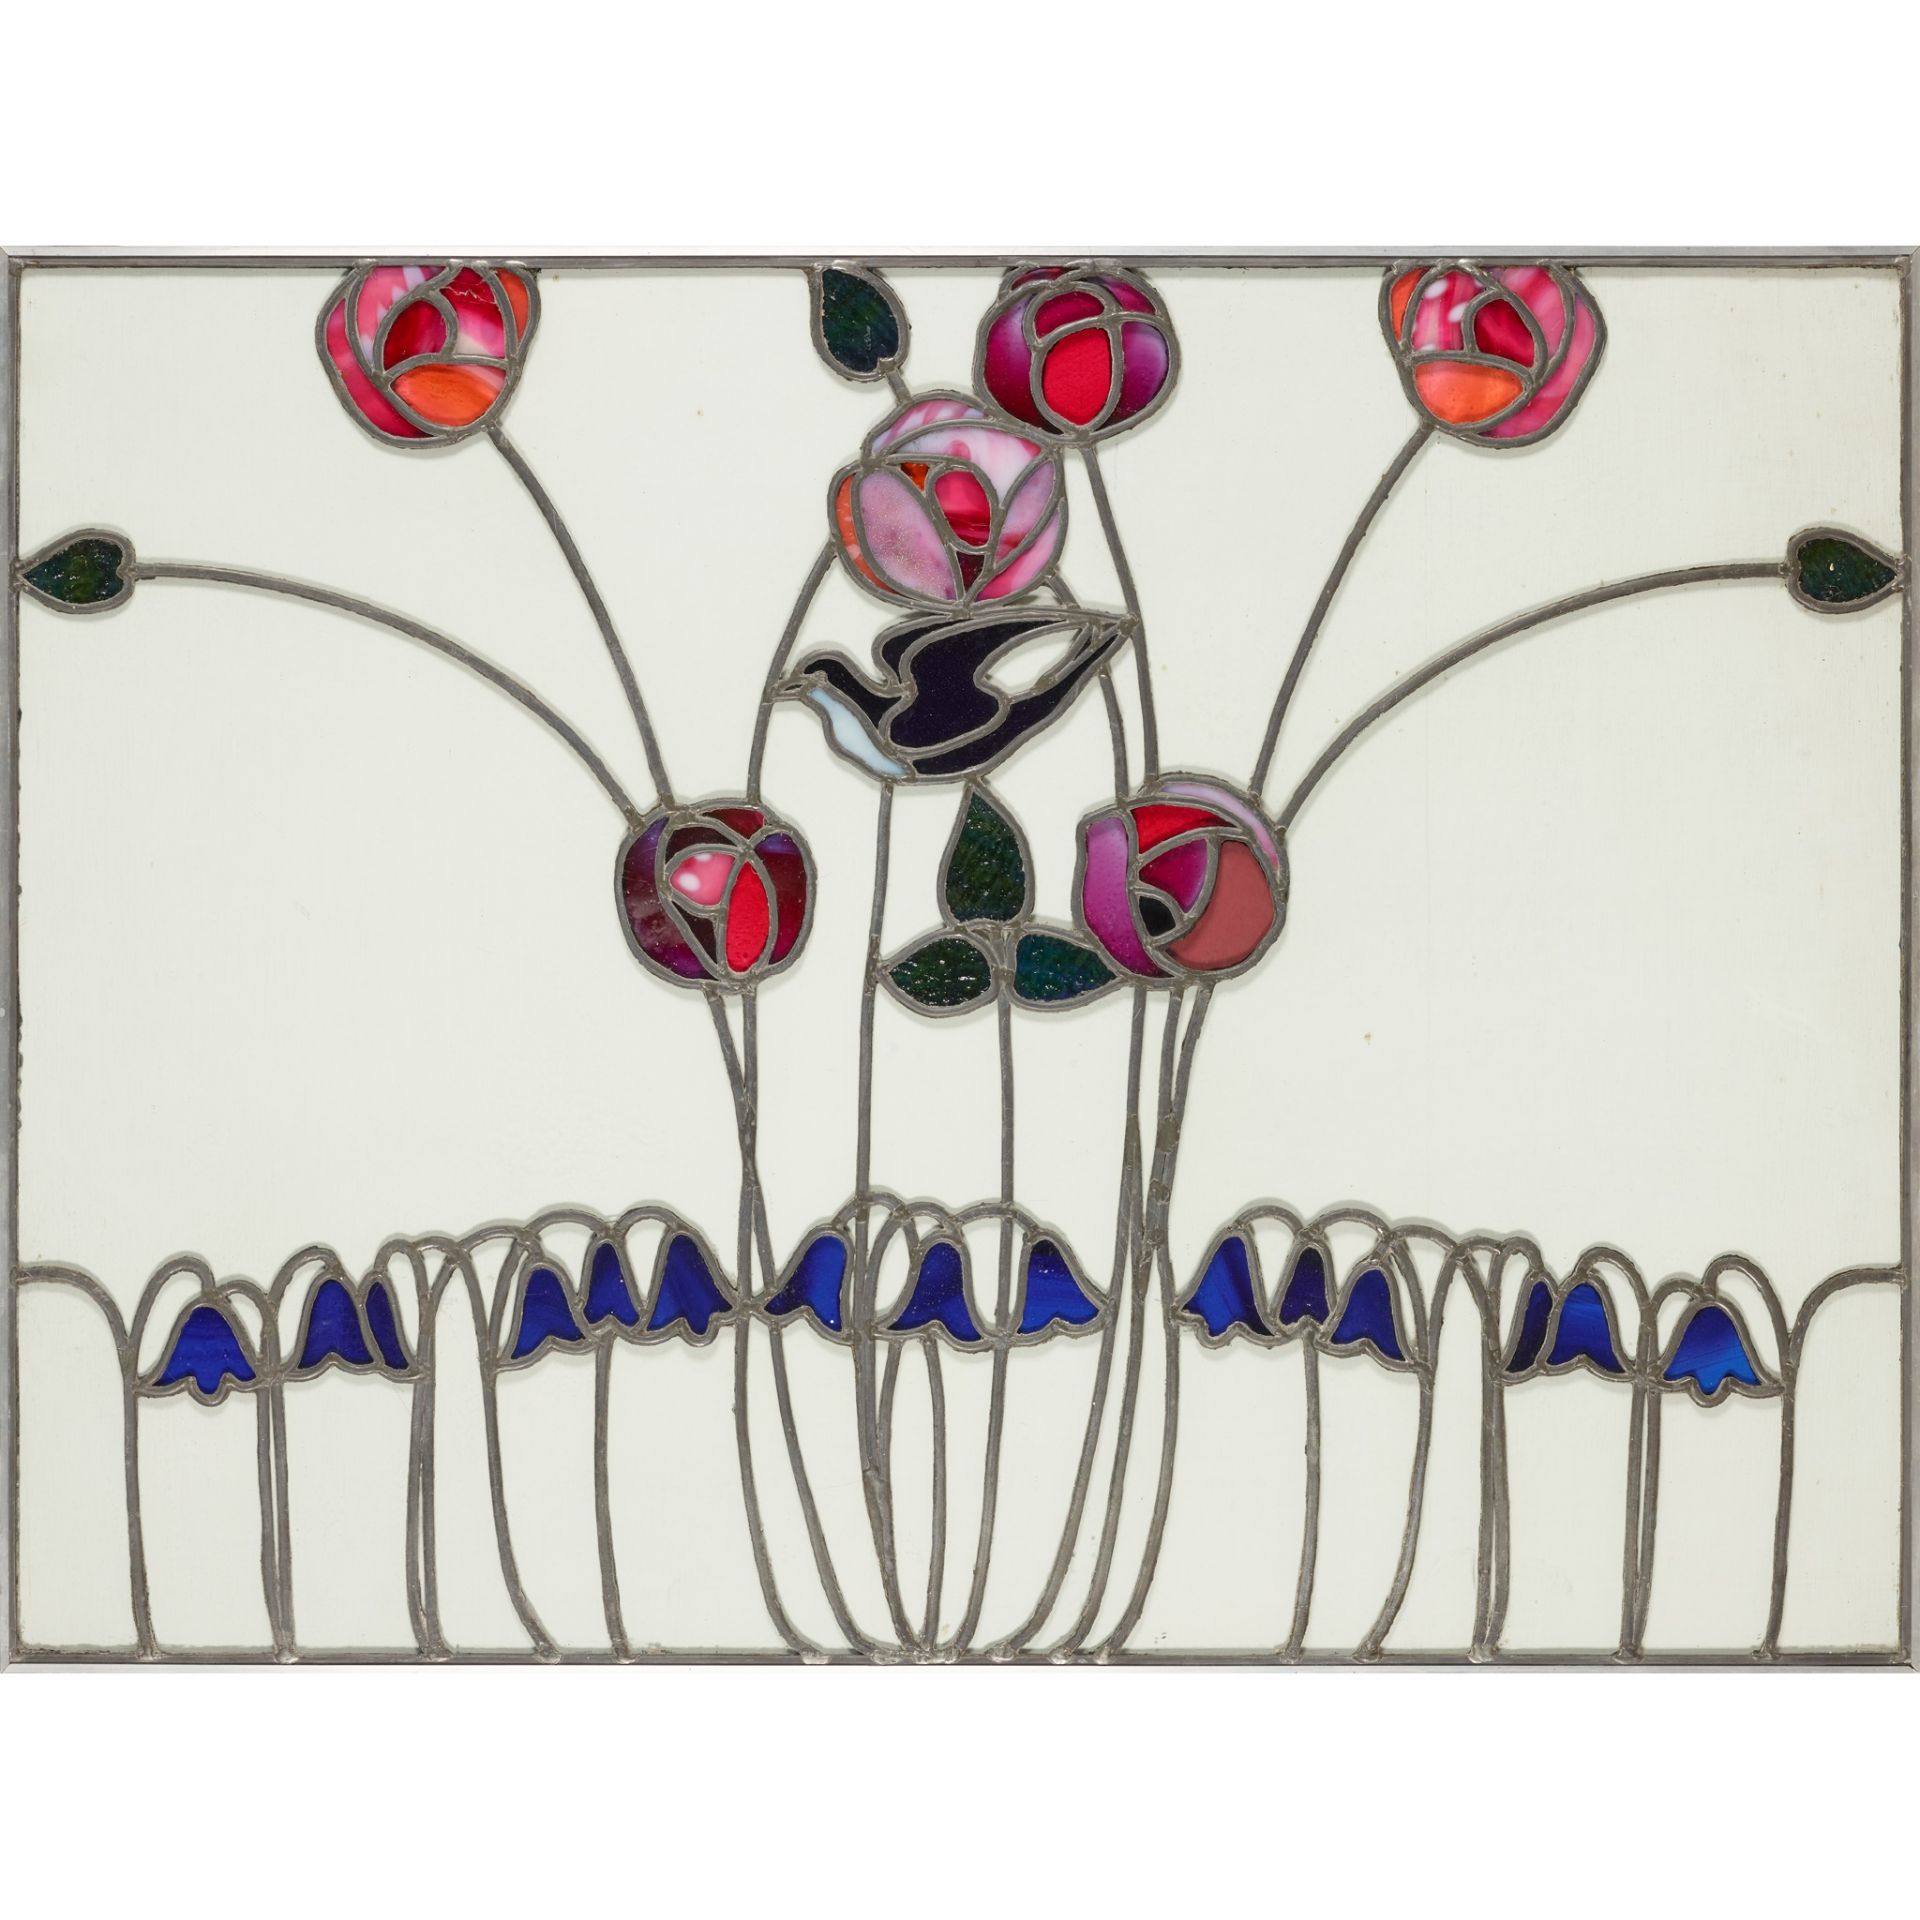 ERNEST ARCHIBALD TAYLOR (1874-1951) (ATTRIBUTED DESIGNER) SUITE OF STAINED GLASS, CIRCA 1900 - Image 4 of 7